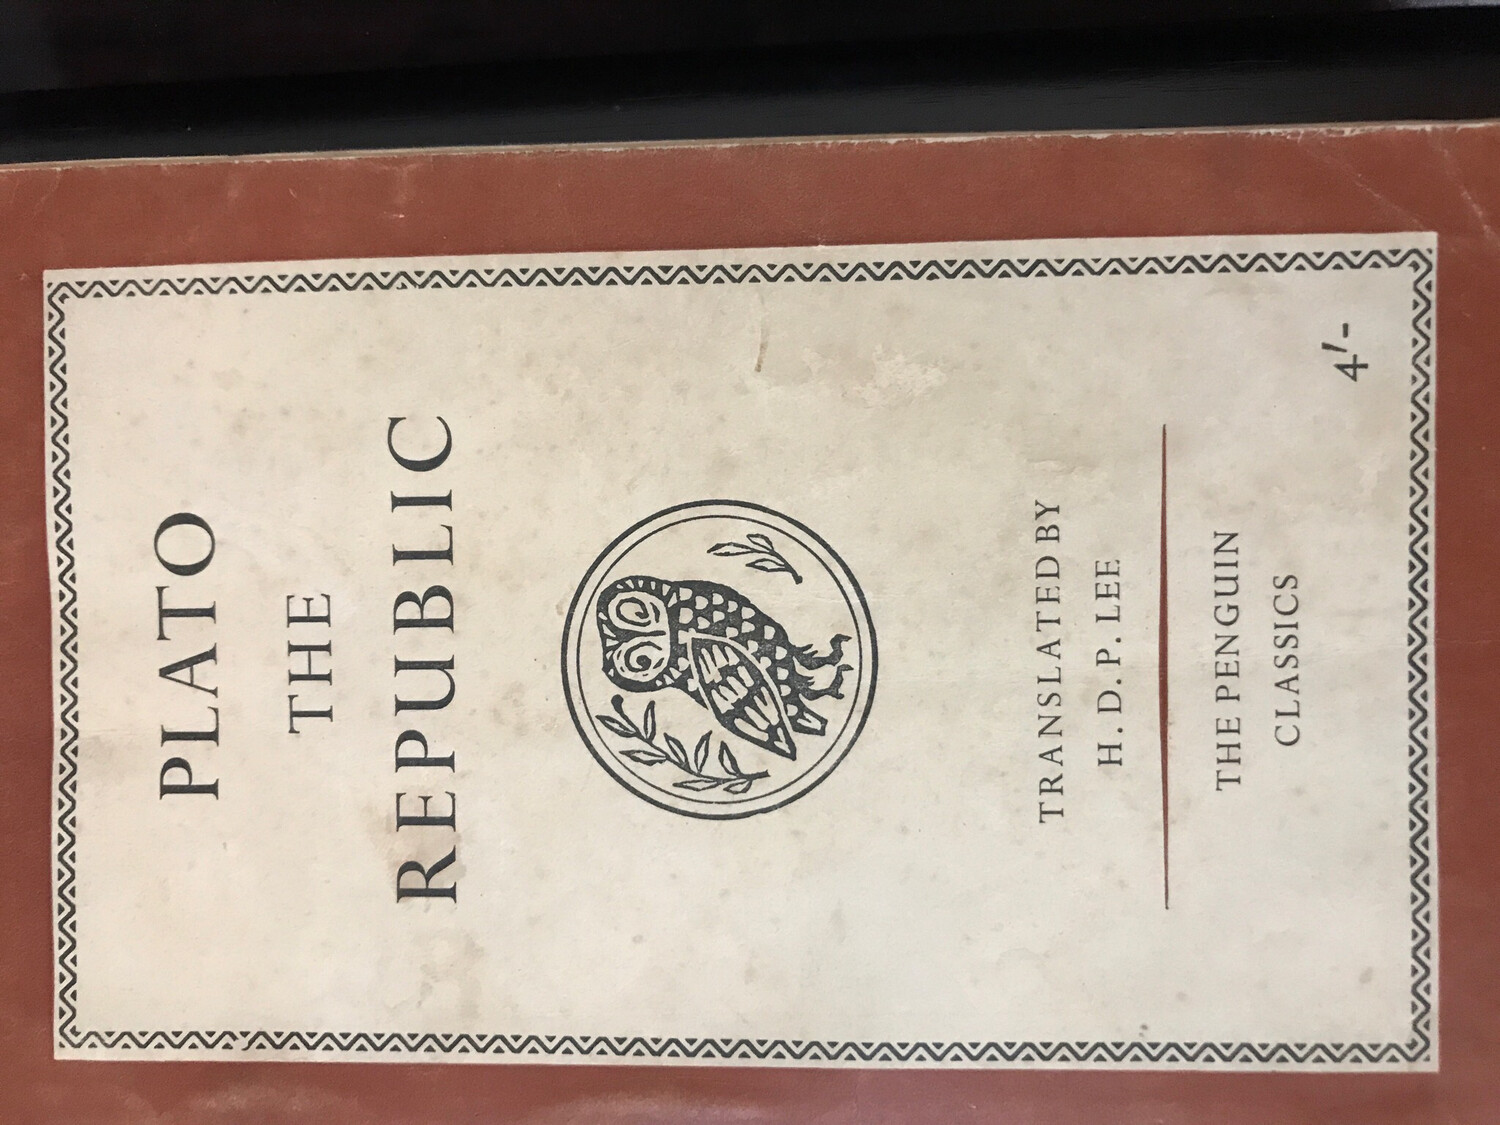 Plato The Republic, Translated By H. D. P. Lee